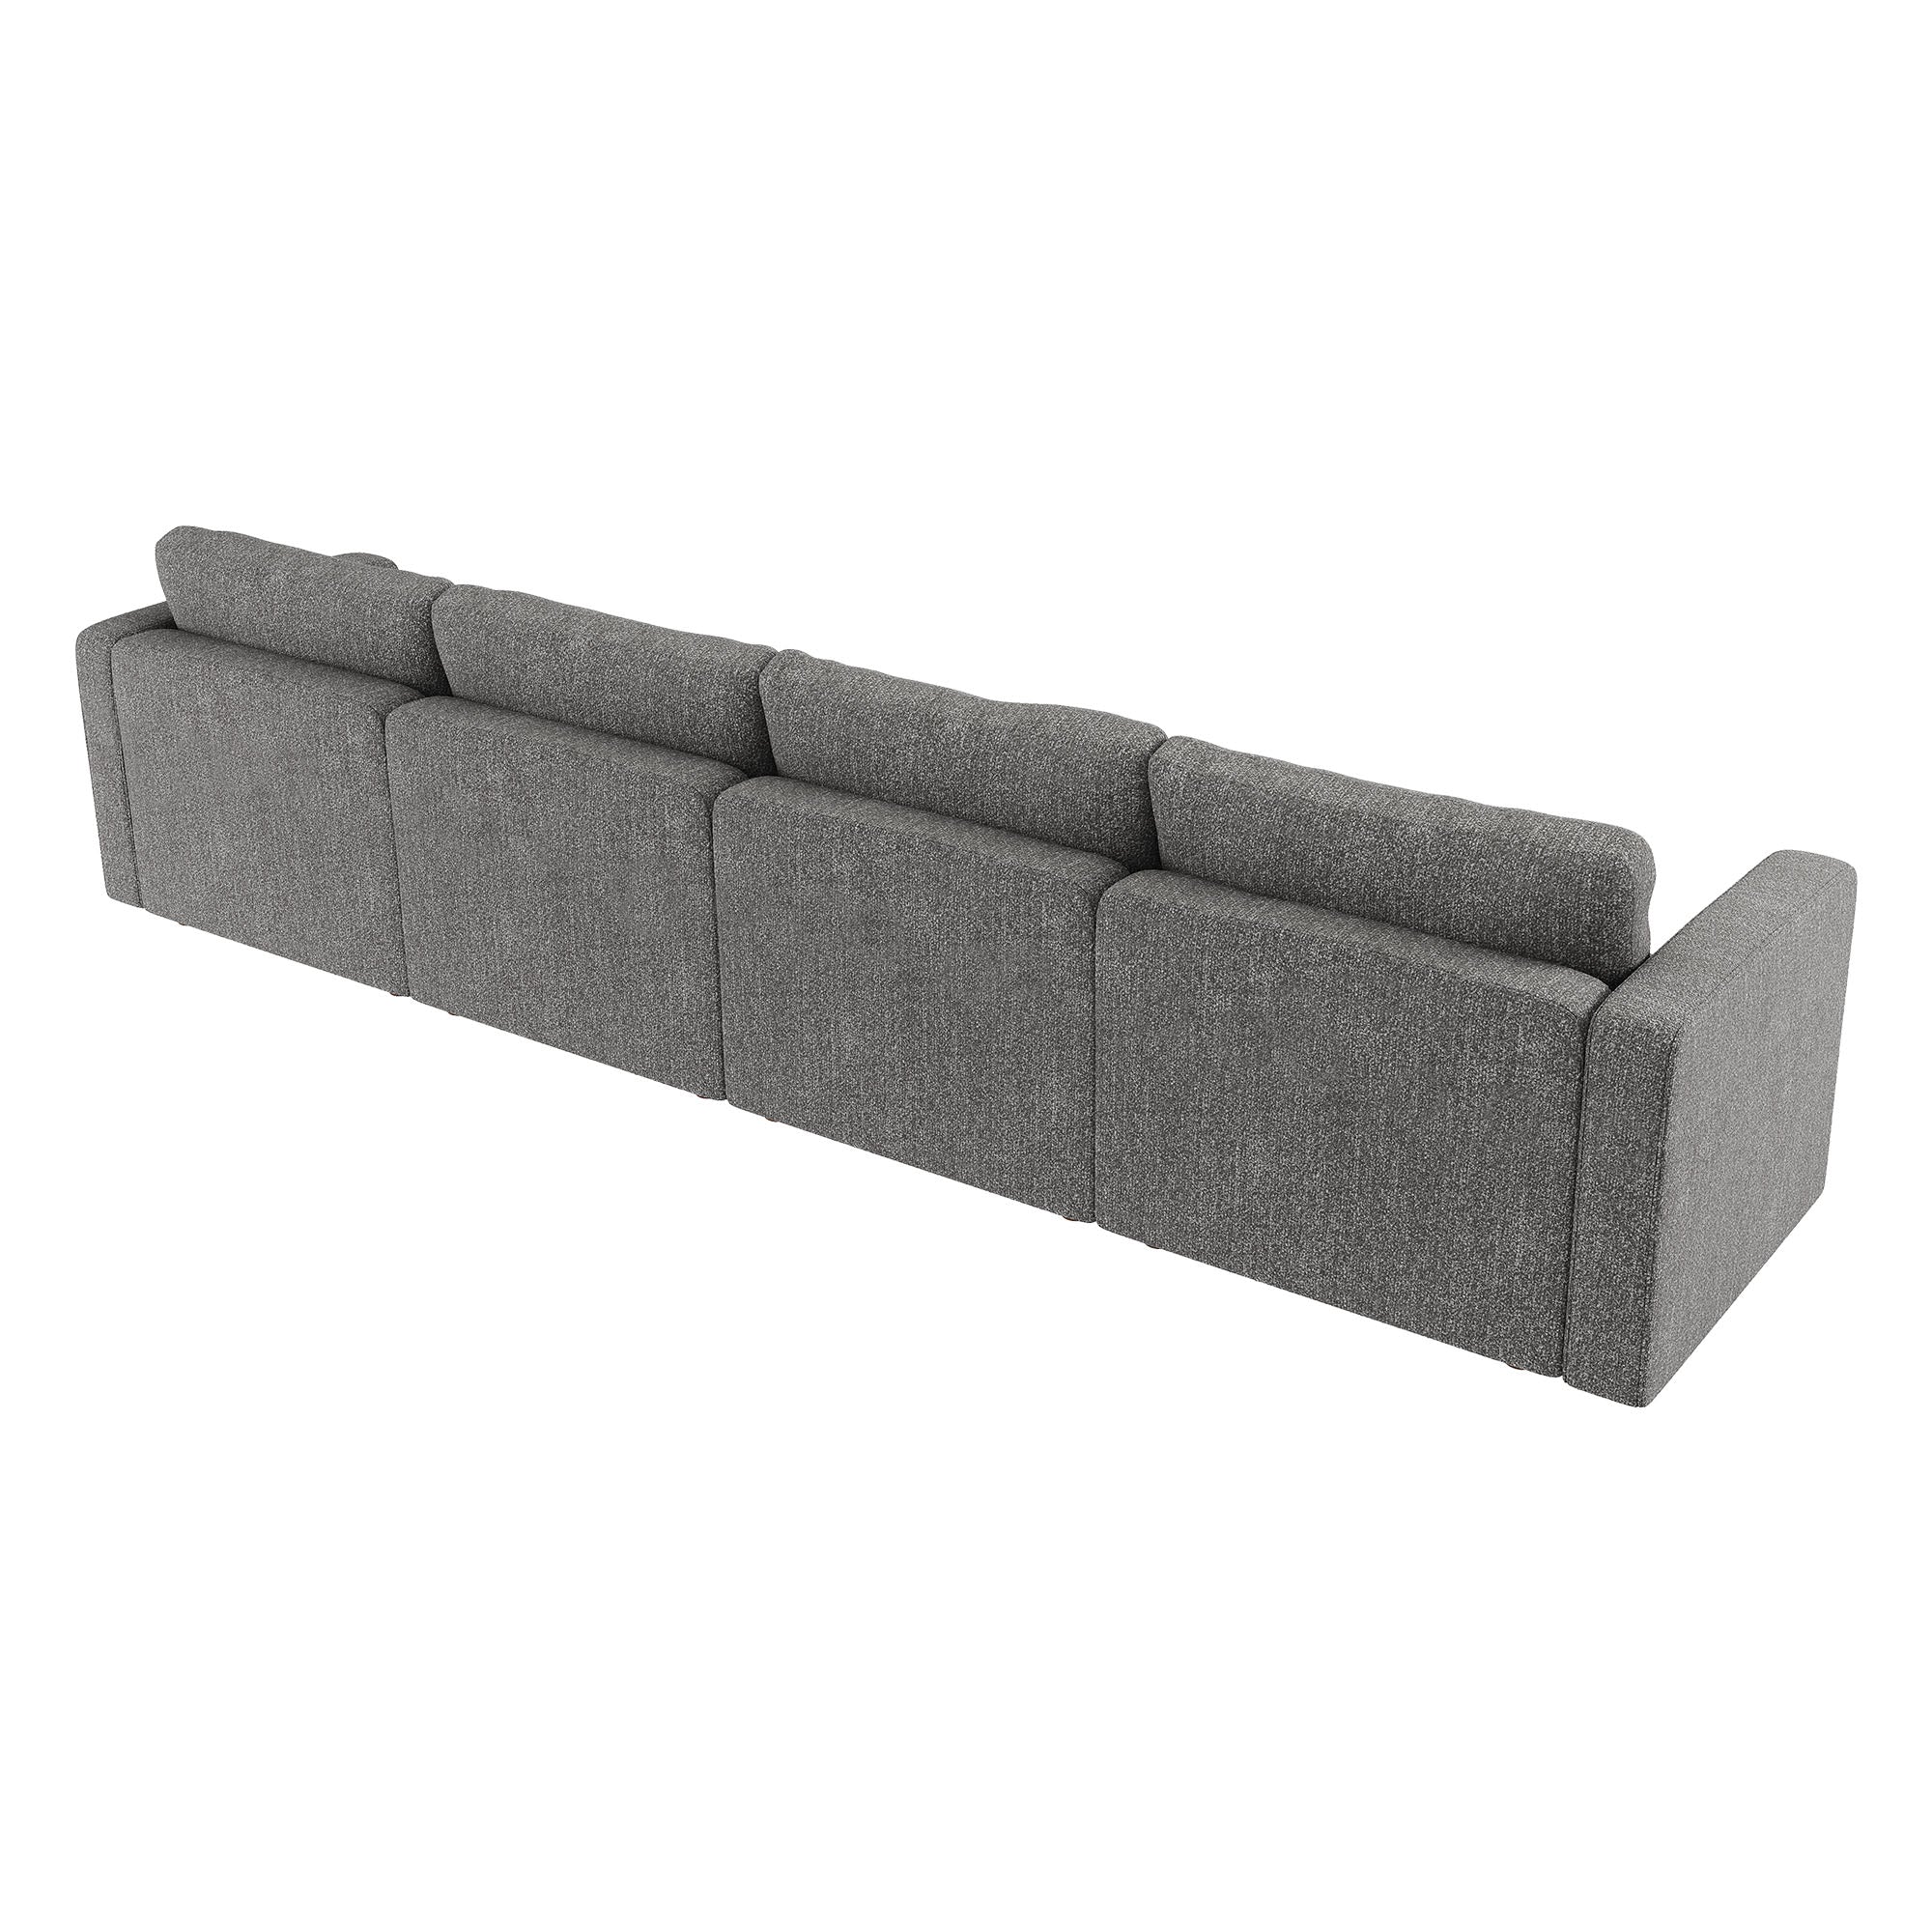 HONBAY Polyester 4 Seaters Spacious Modular Sofa Couch with Hidden Storage Space